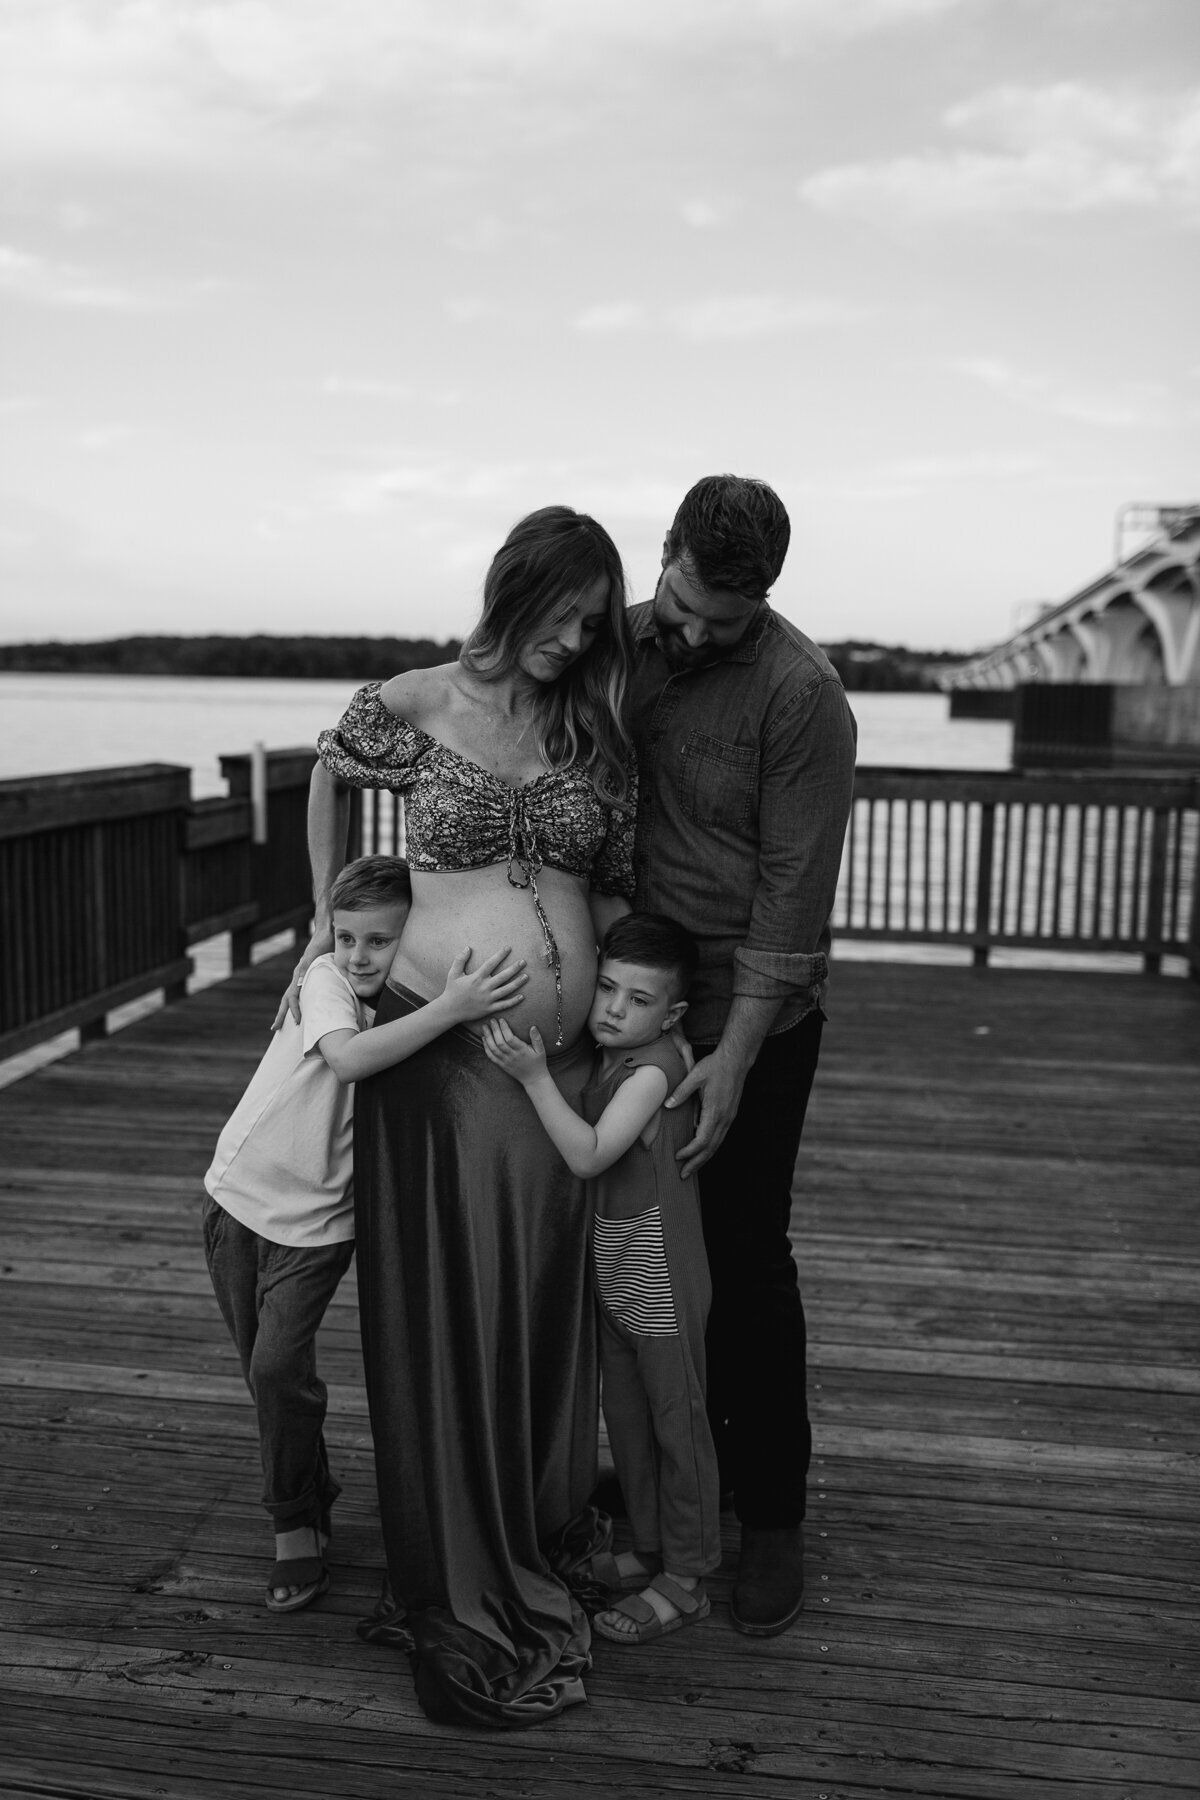 Black and white image of family on a dock